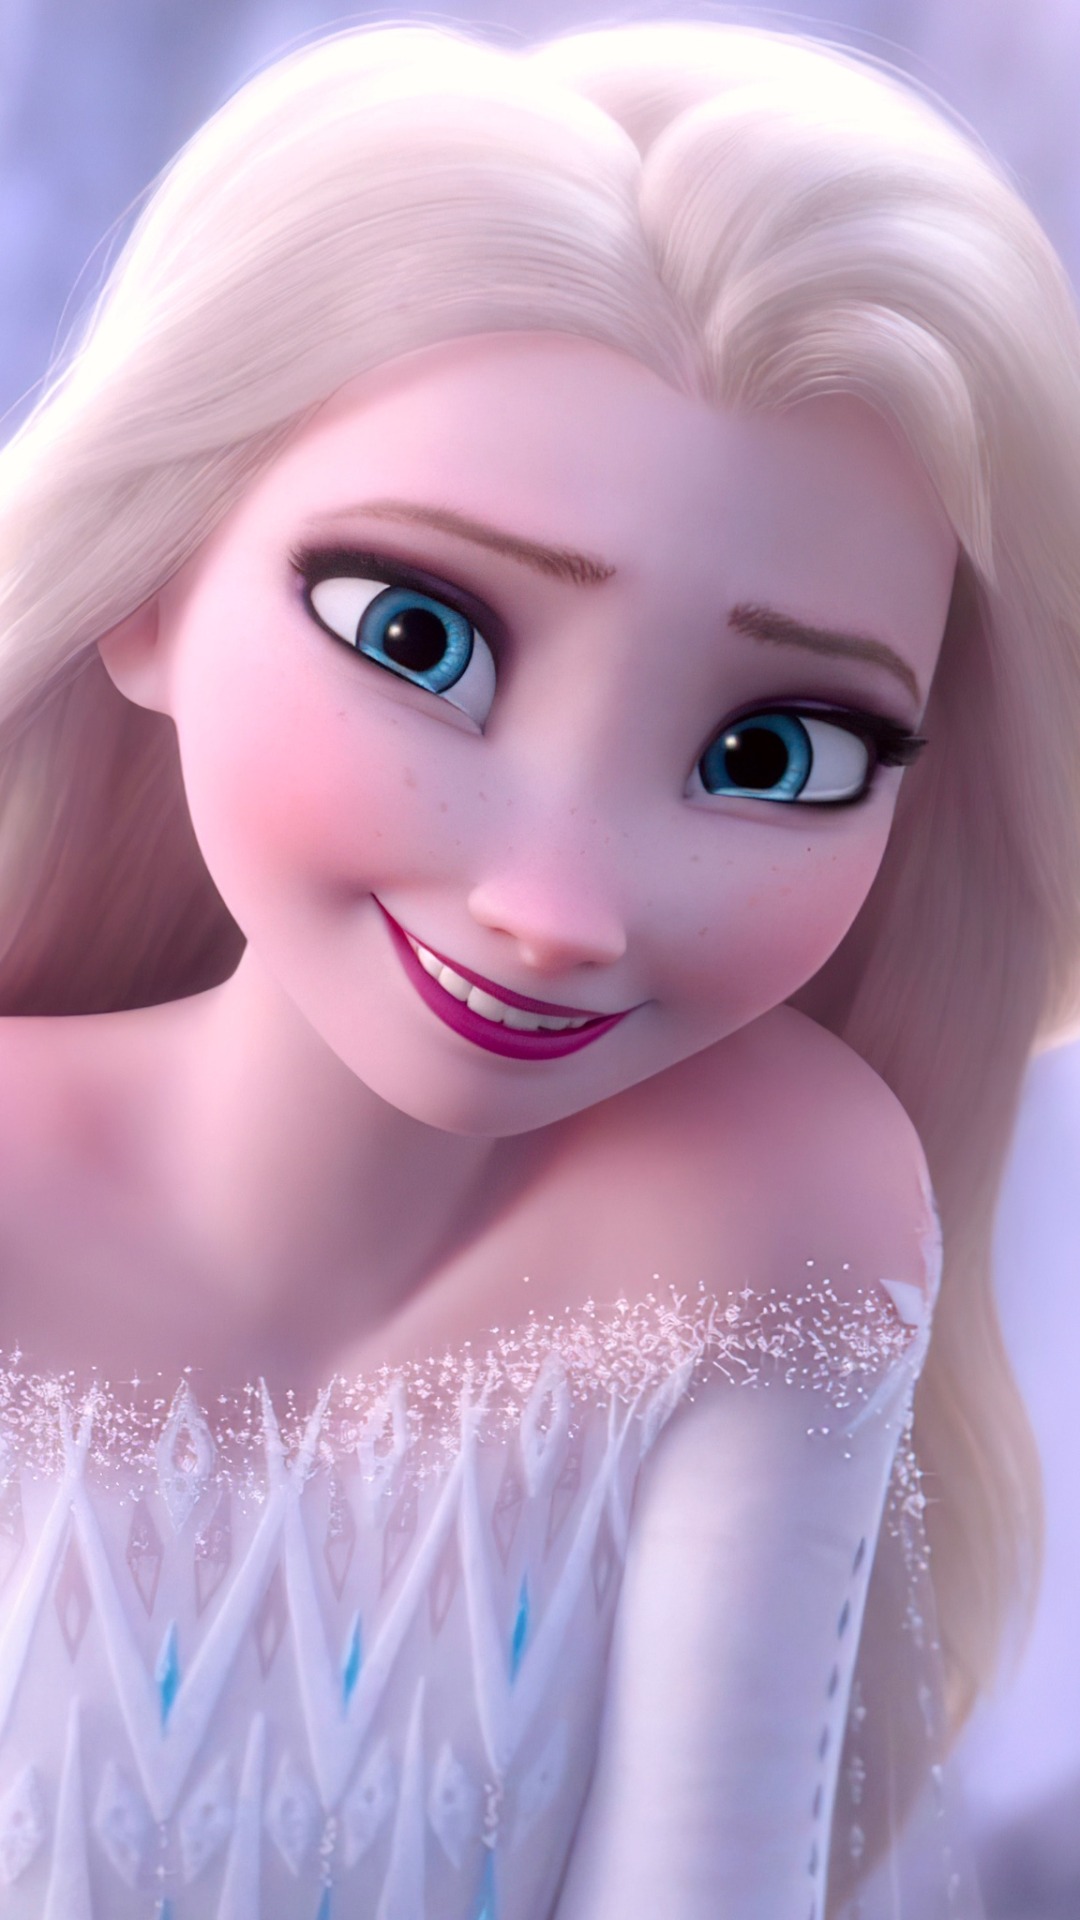 lots-of-big-and-beautiful-pictures-of-elsa-from-frozen-2-movie-youloveit